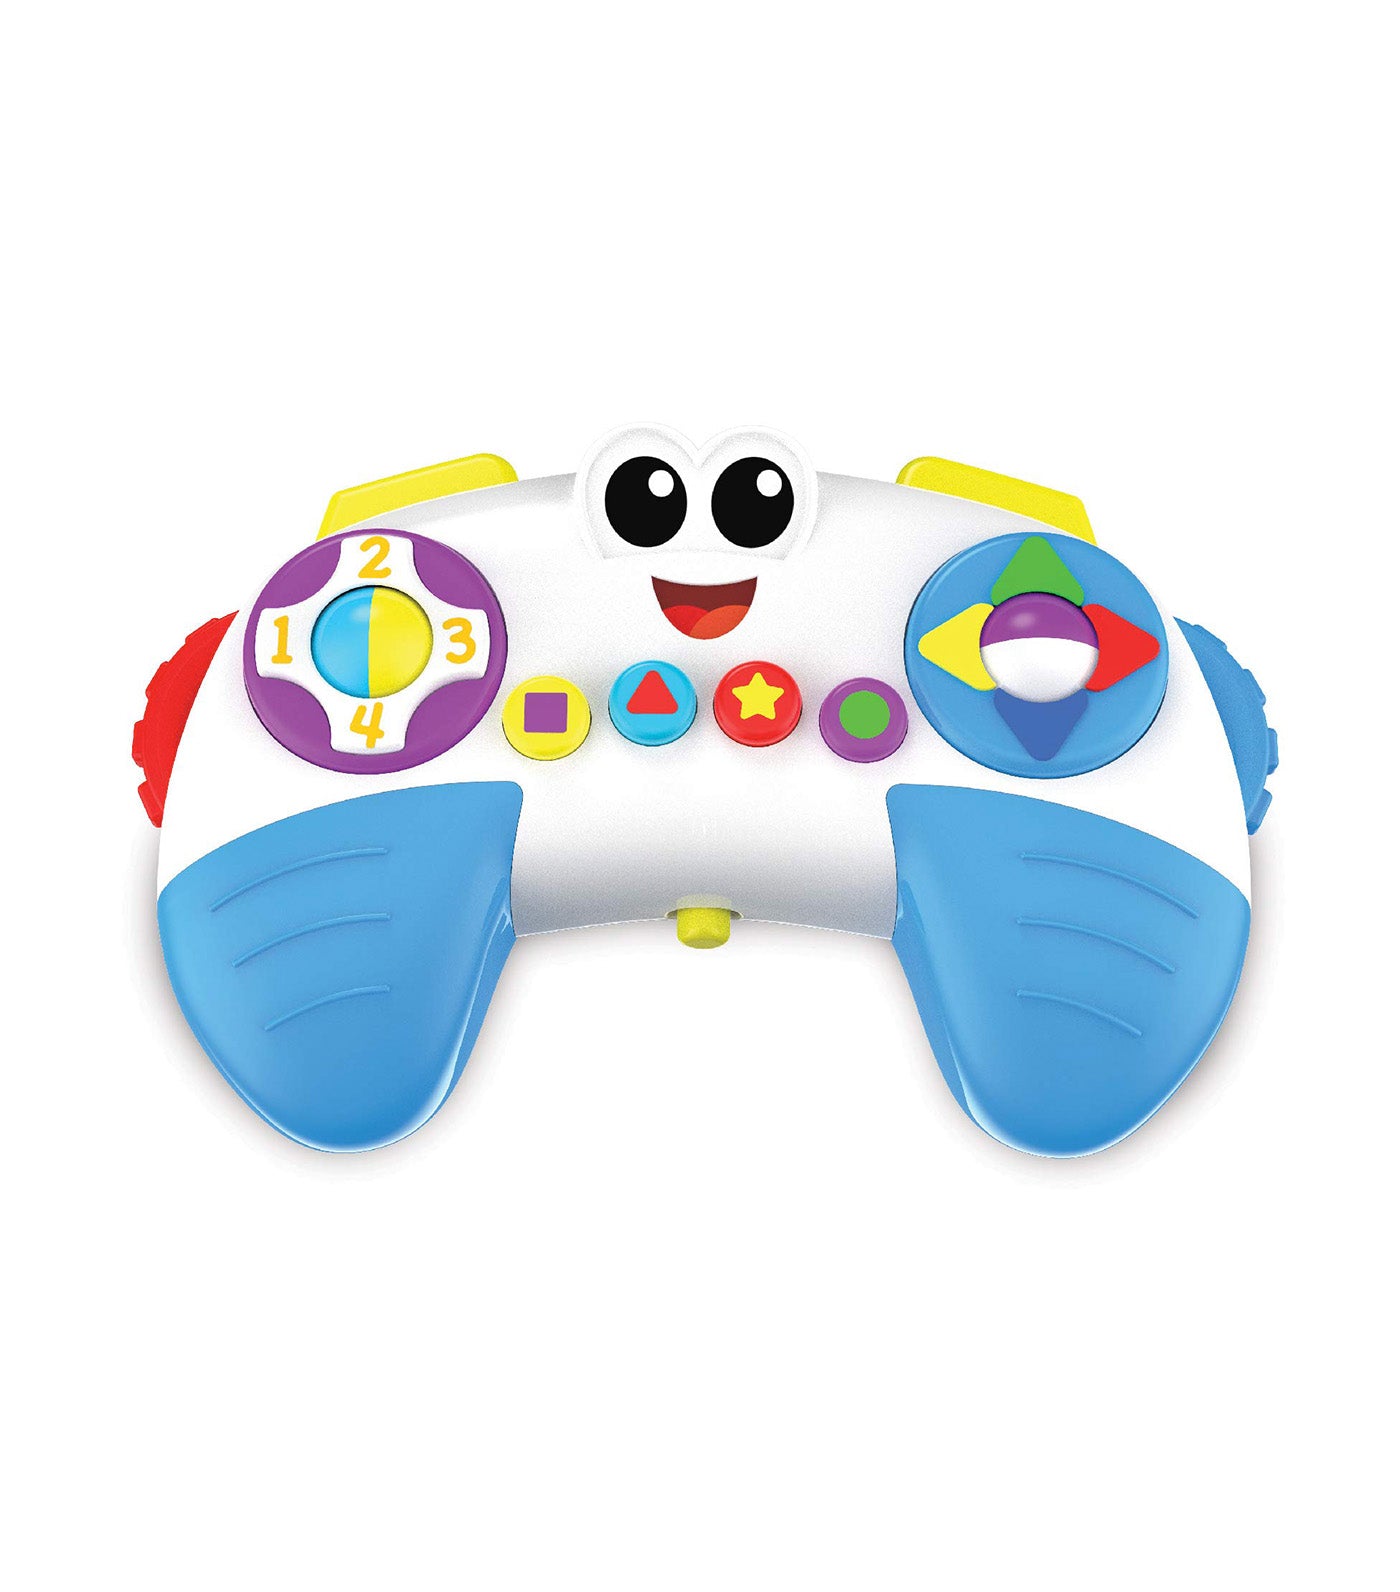 Early Learning - On-the-Go Game Controller